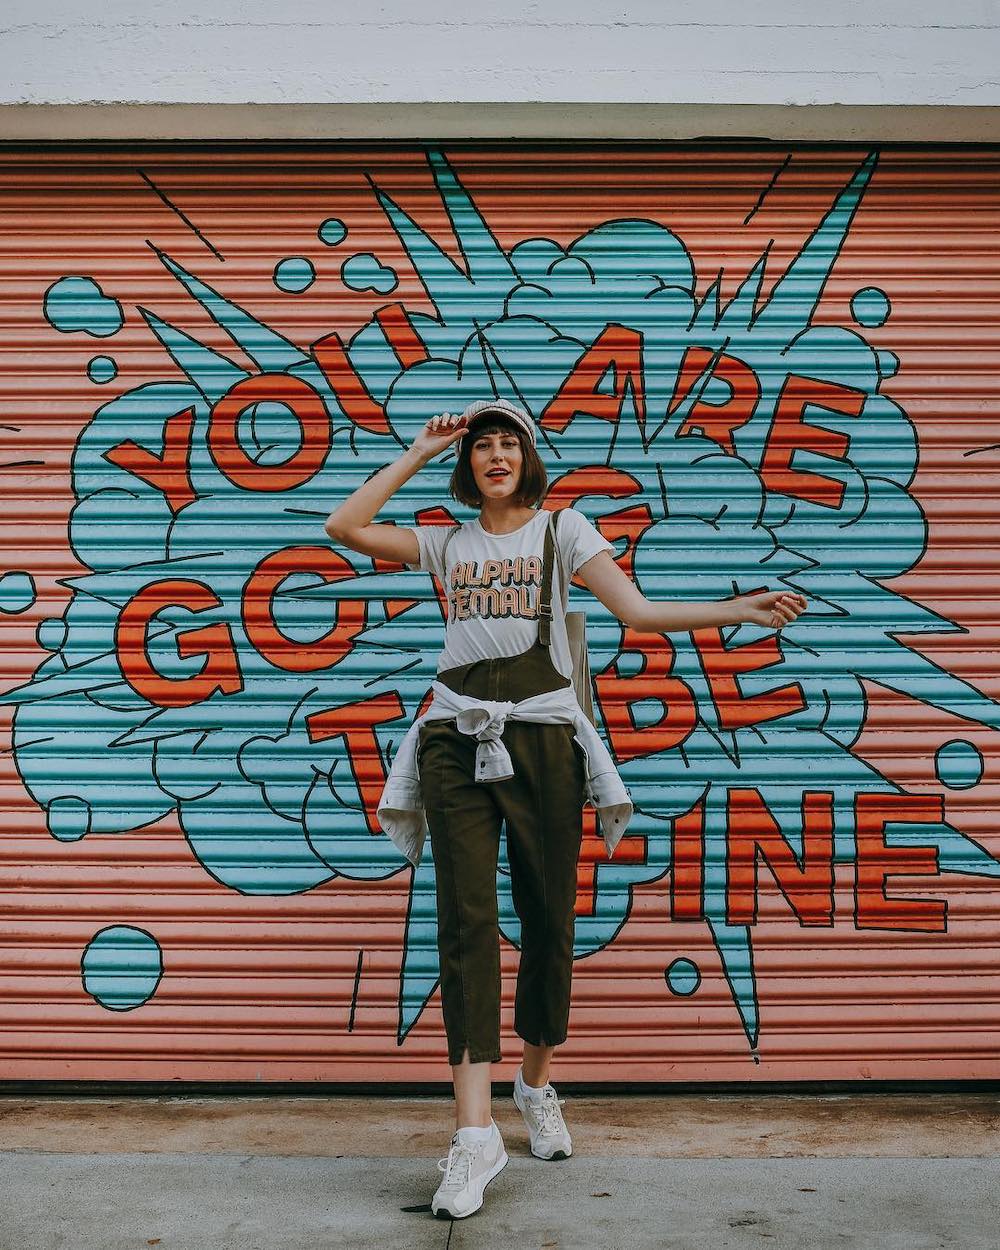 You Are Going To Be Fine Mural - @dazey_la Instagram